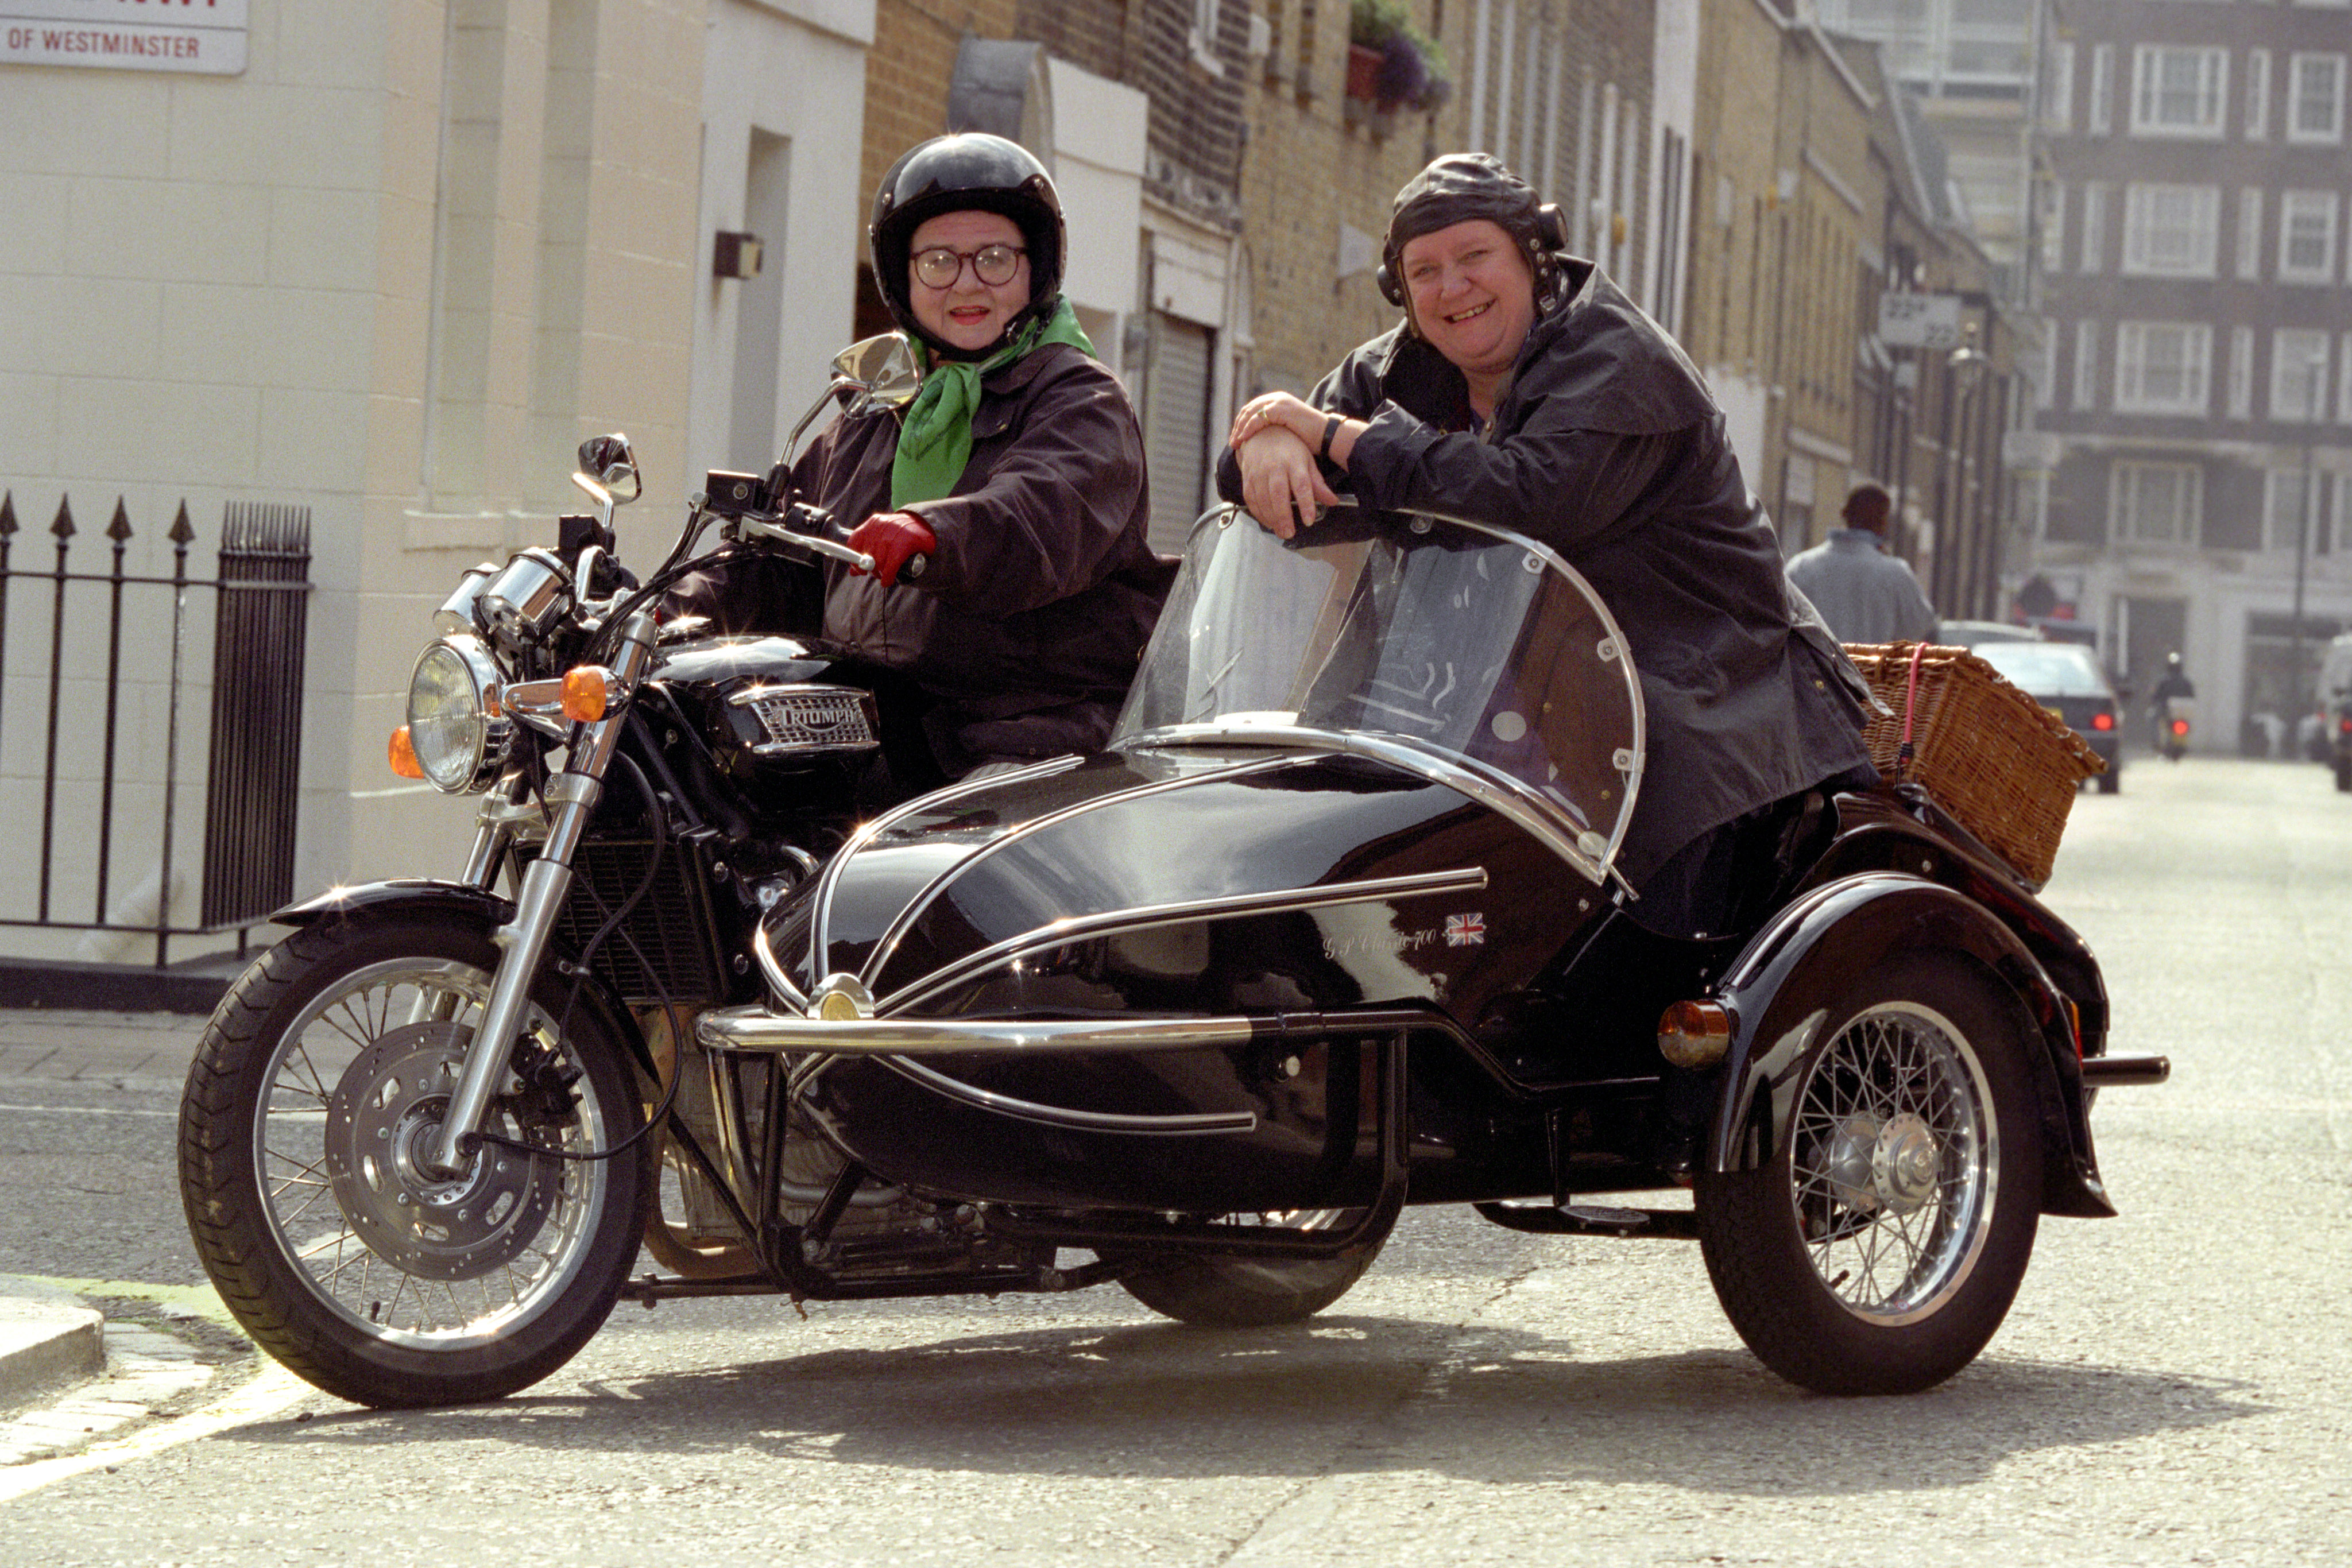 Two women on a Triumph Thunderbird motorcycle, one in the driver’s seat and one in the side car, both wearing helmets, on a London residential street.